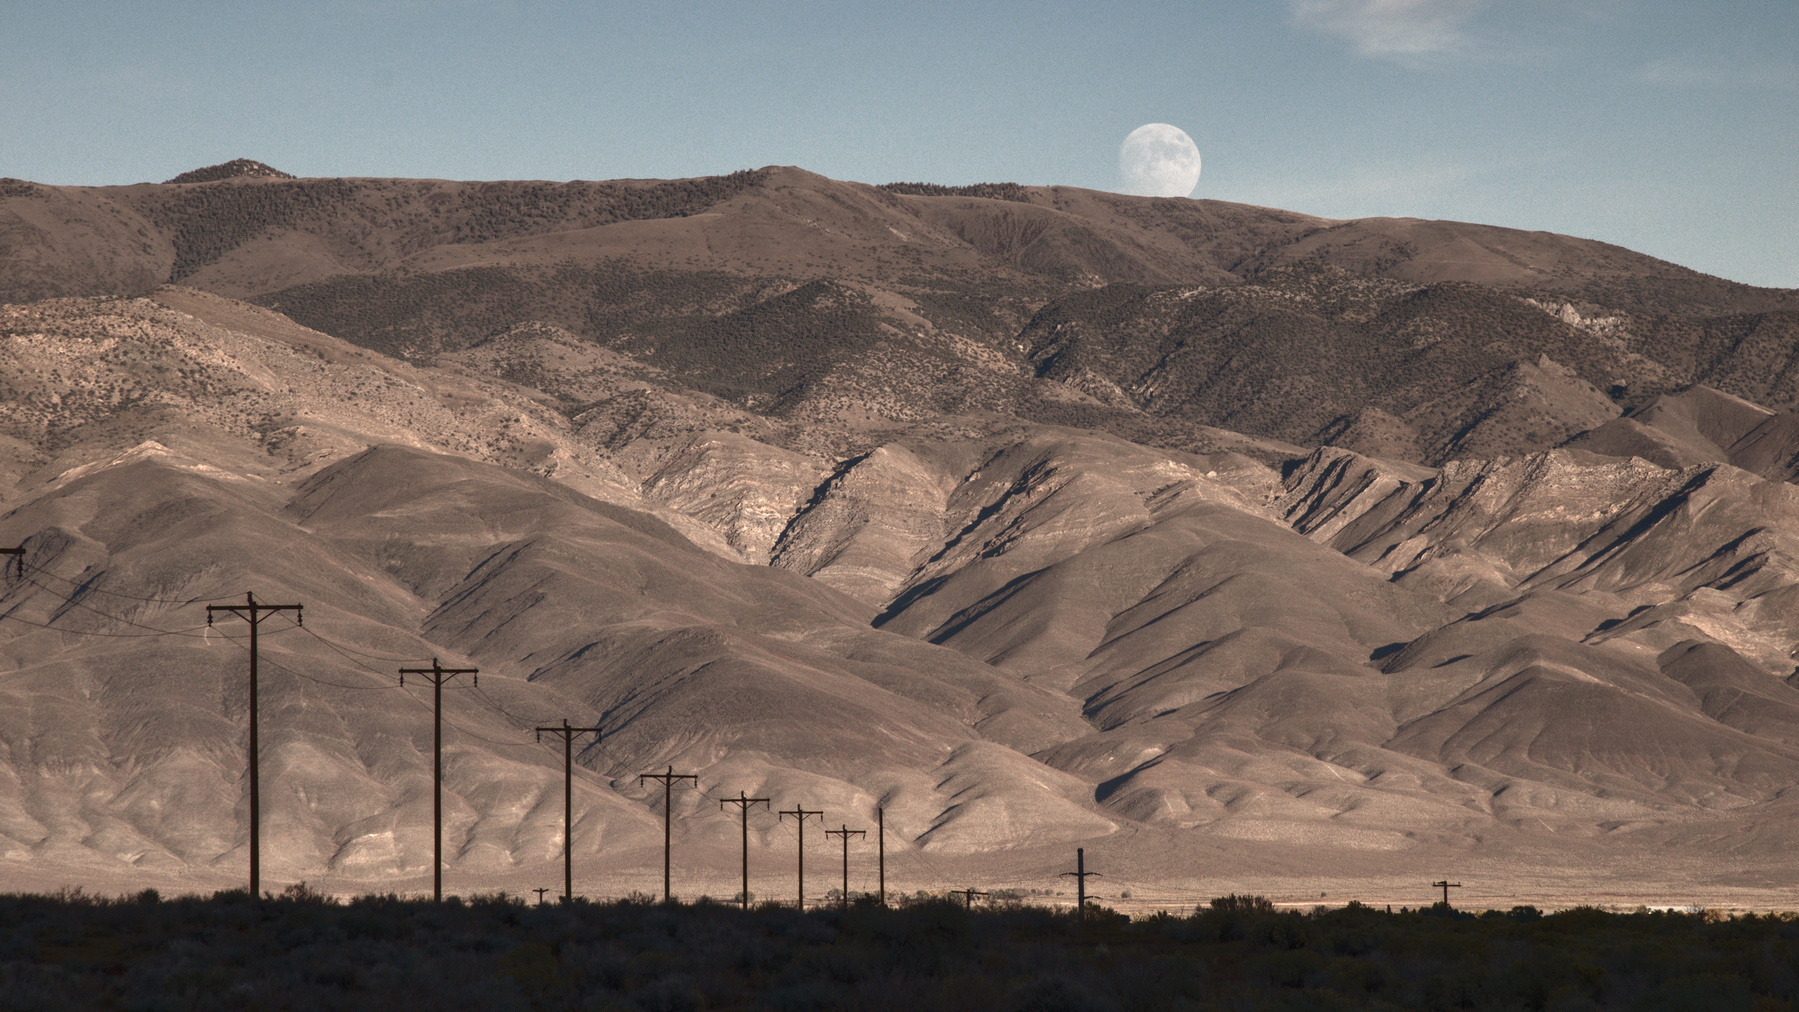 Power poles, near on the left, recede towards a high mountain range, which is eroded and barren of greenery, so that it seems soft and brown.  A nearly full moon has risen just above the mountain ridge-line.